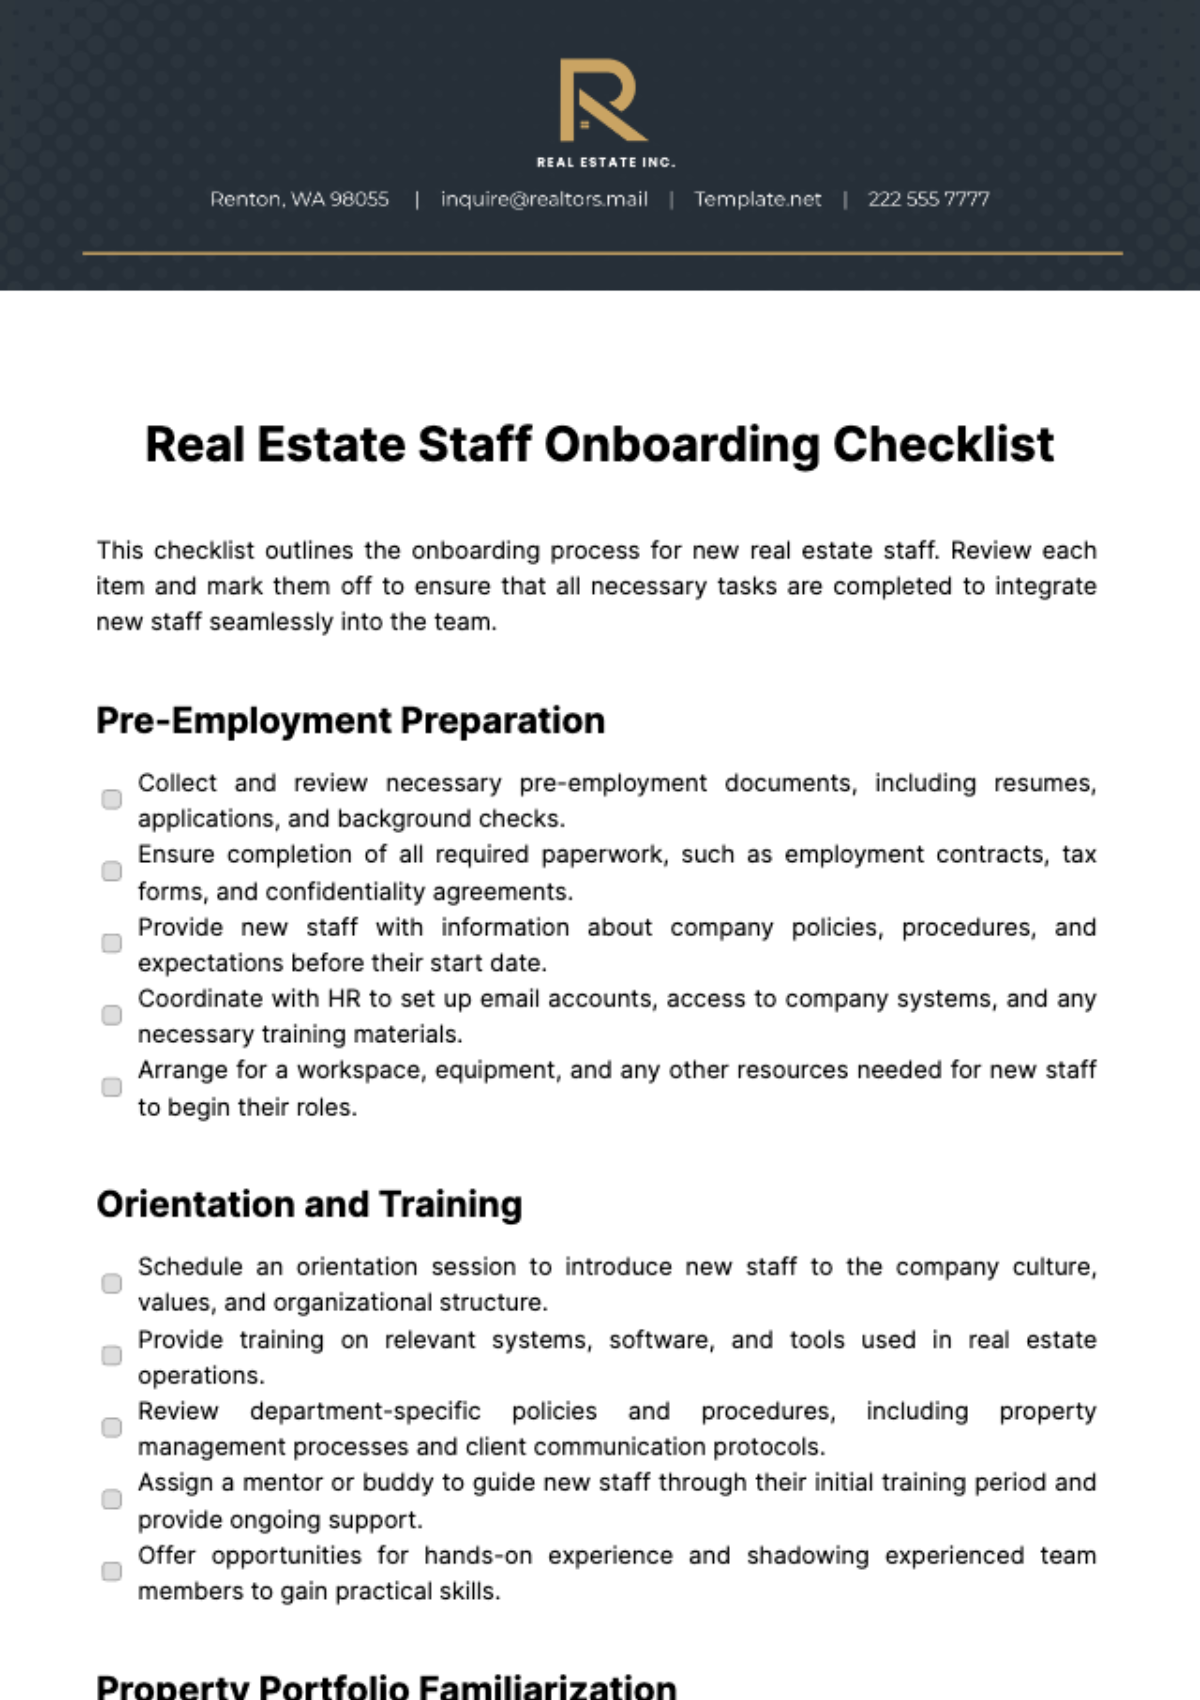 Real Estate Staff Onboarding Checklist Template